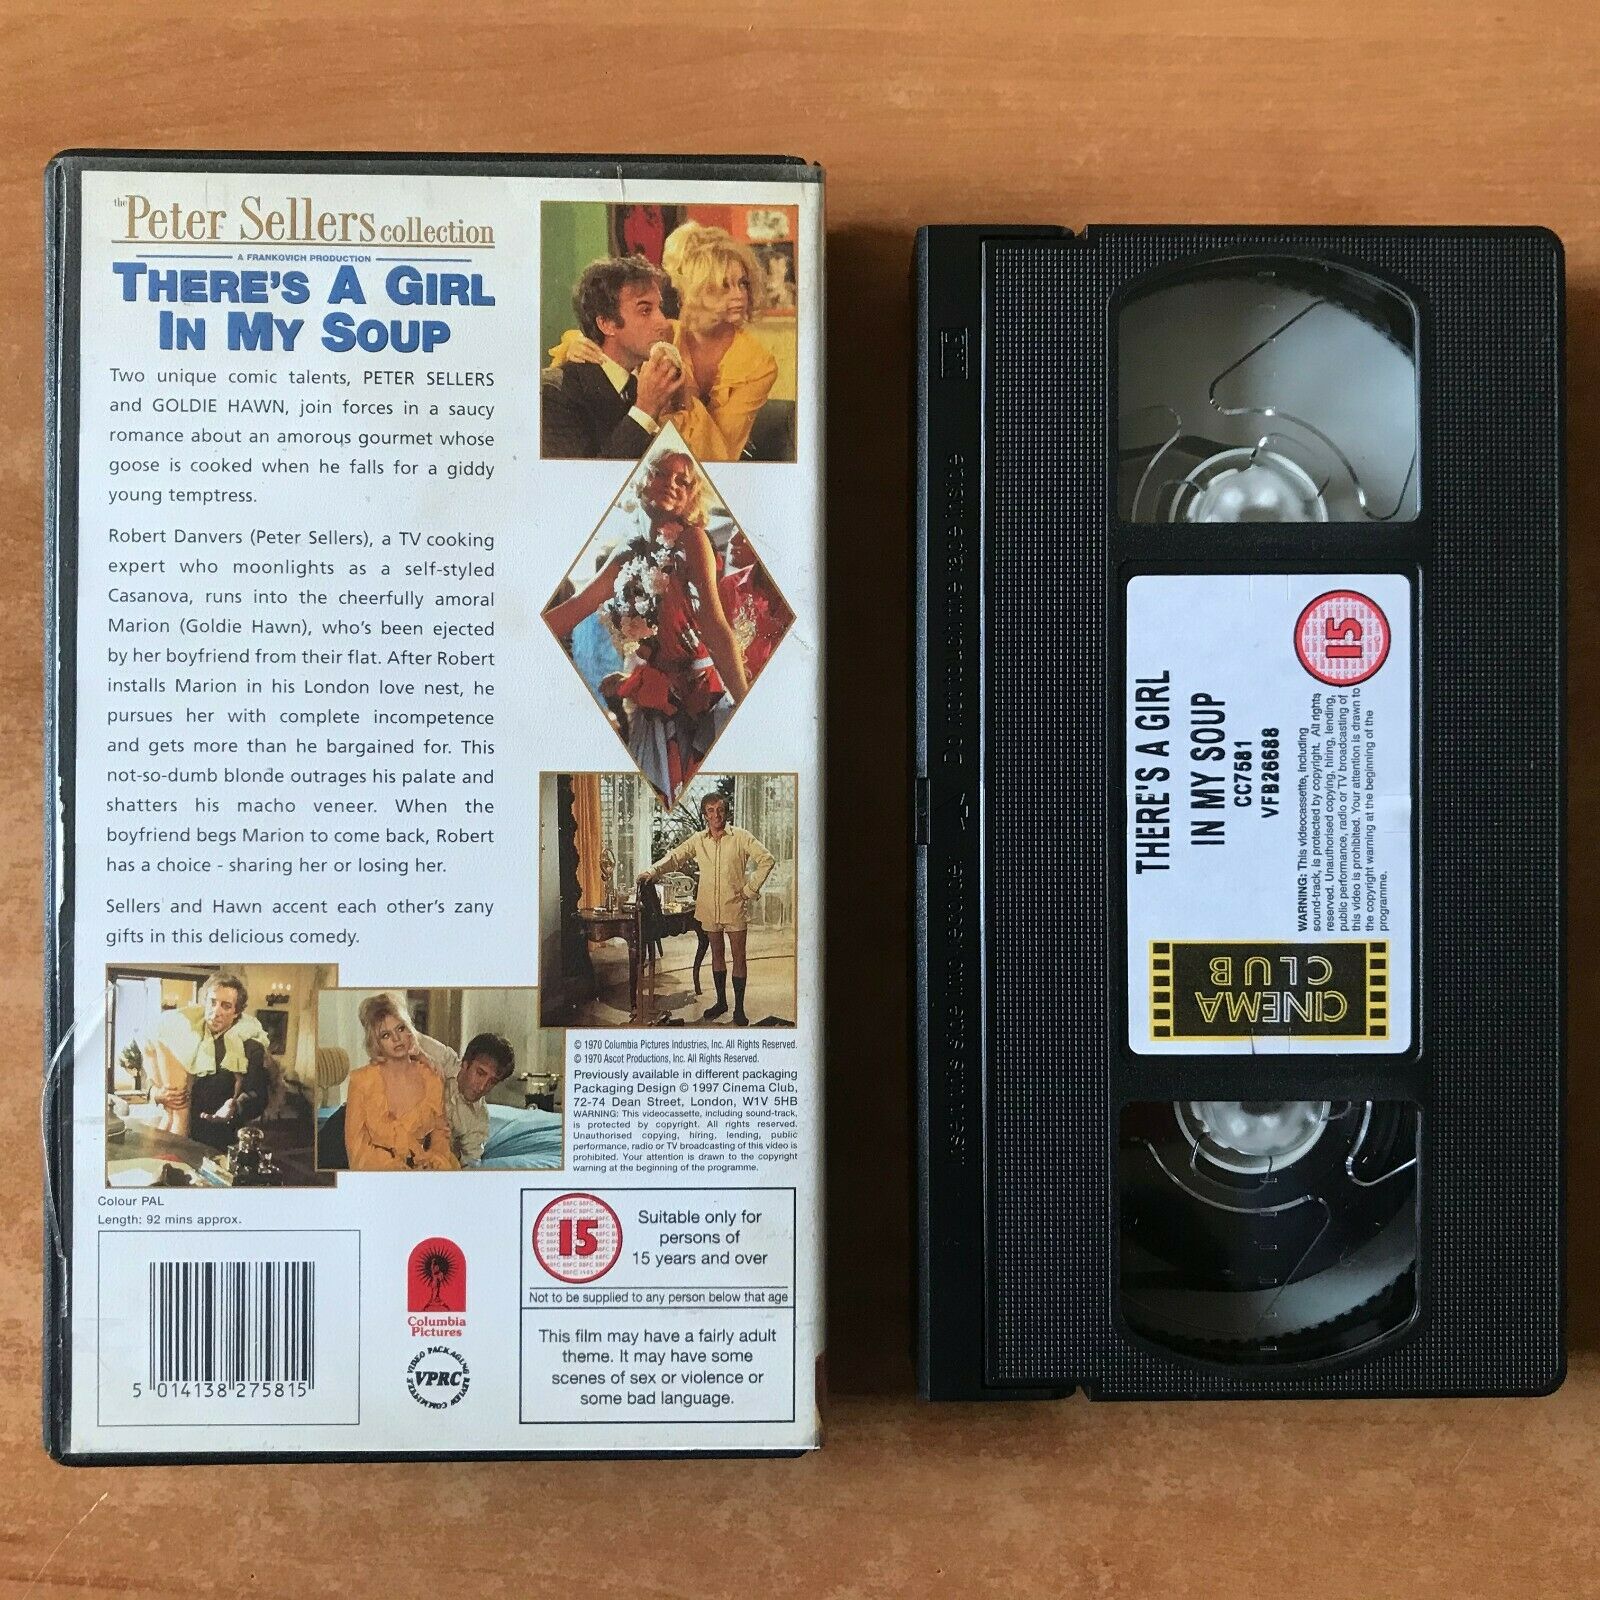 There's A Girl In My Soup [Peter Sellers Collection] Comedy - Goldie Hawn - VHS-